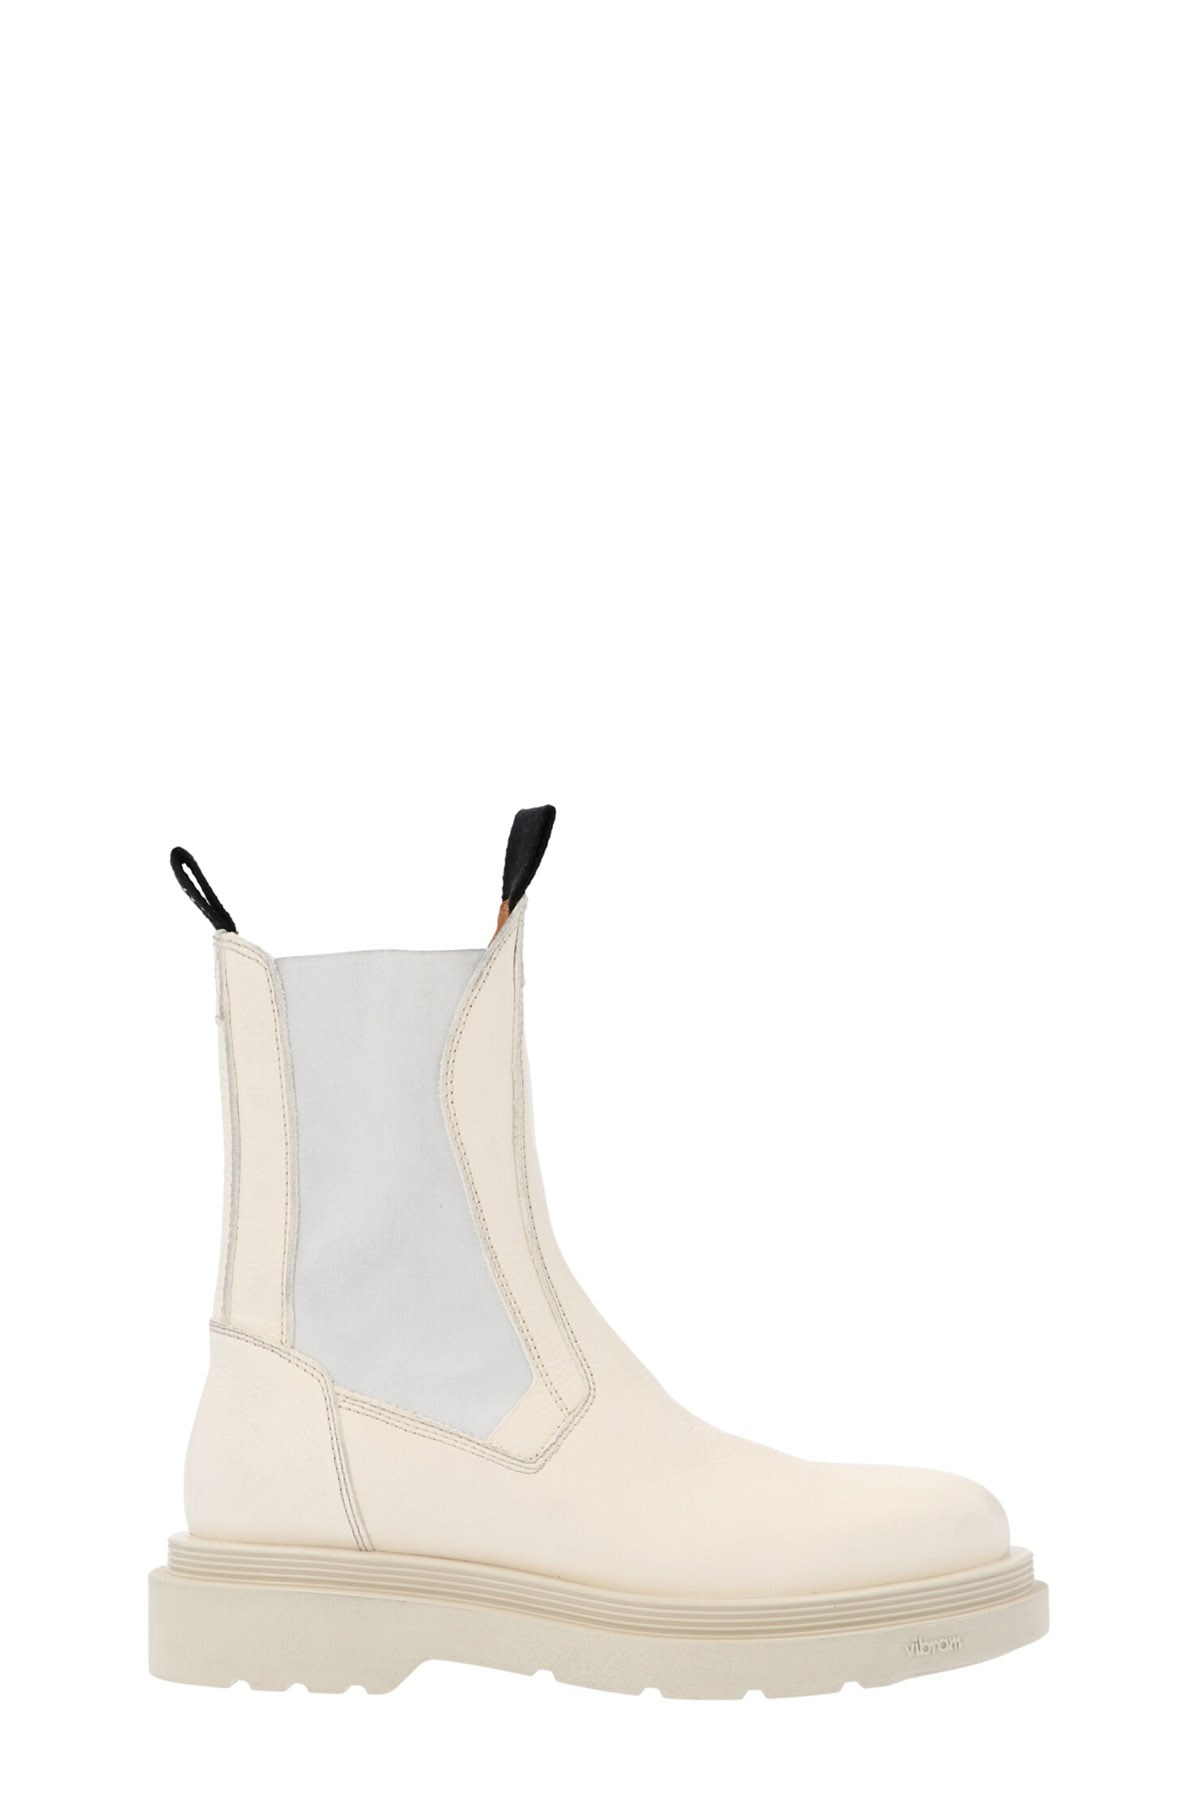 BUTTERO 'Varb’ Chelsea Boots